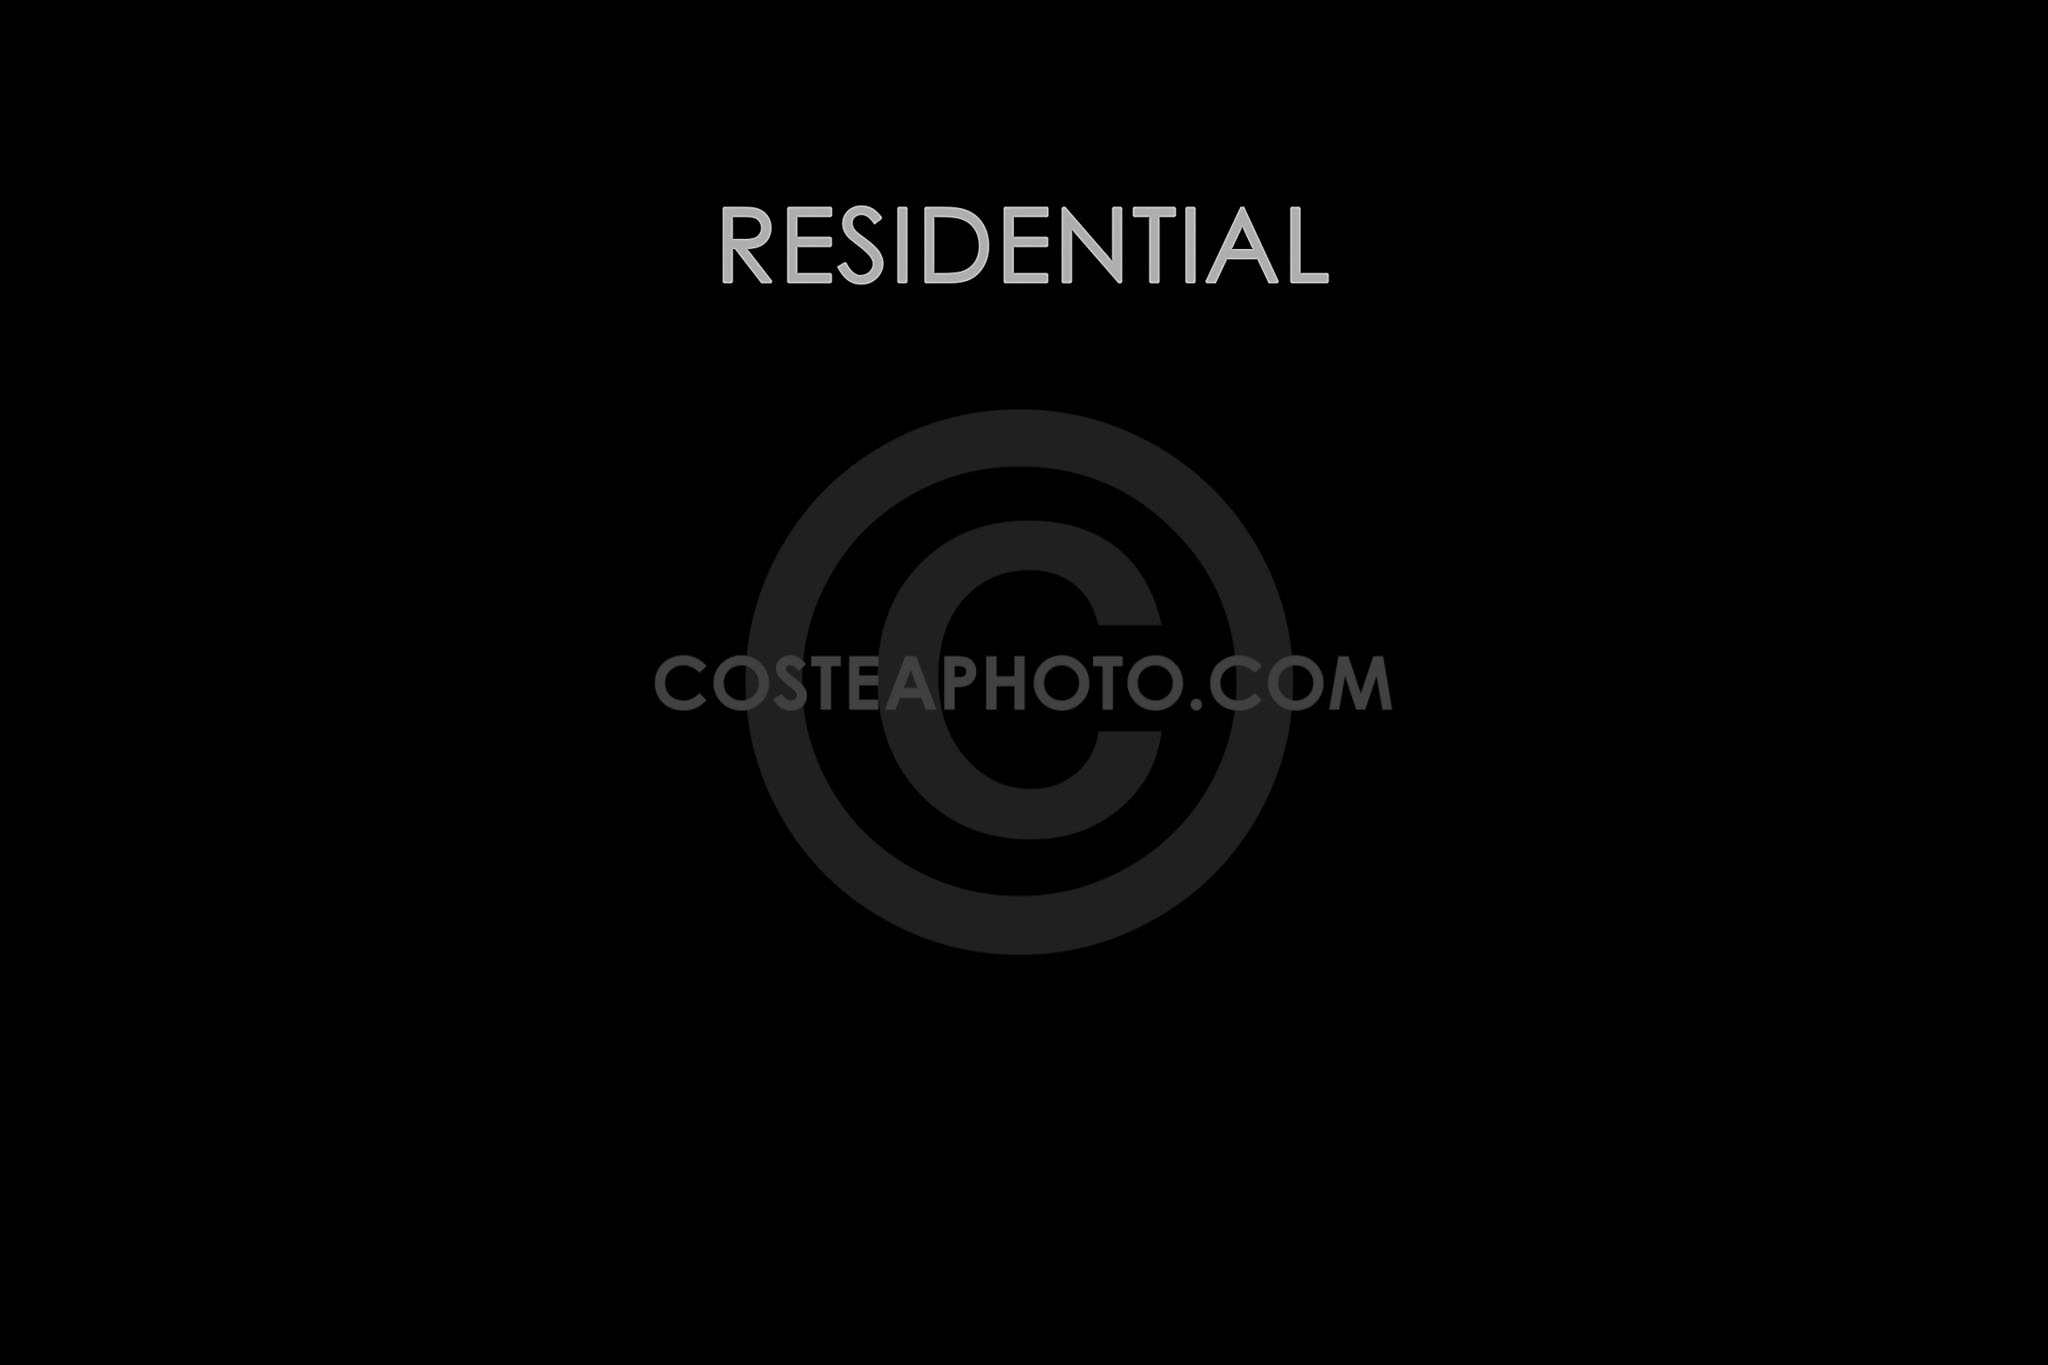 (002) TITLE PAGE - RESIDENTIAL